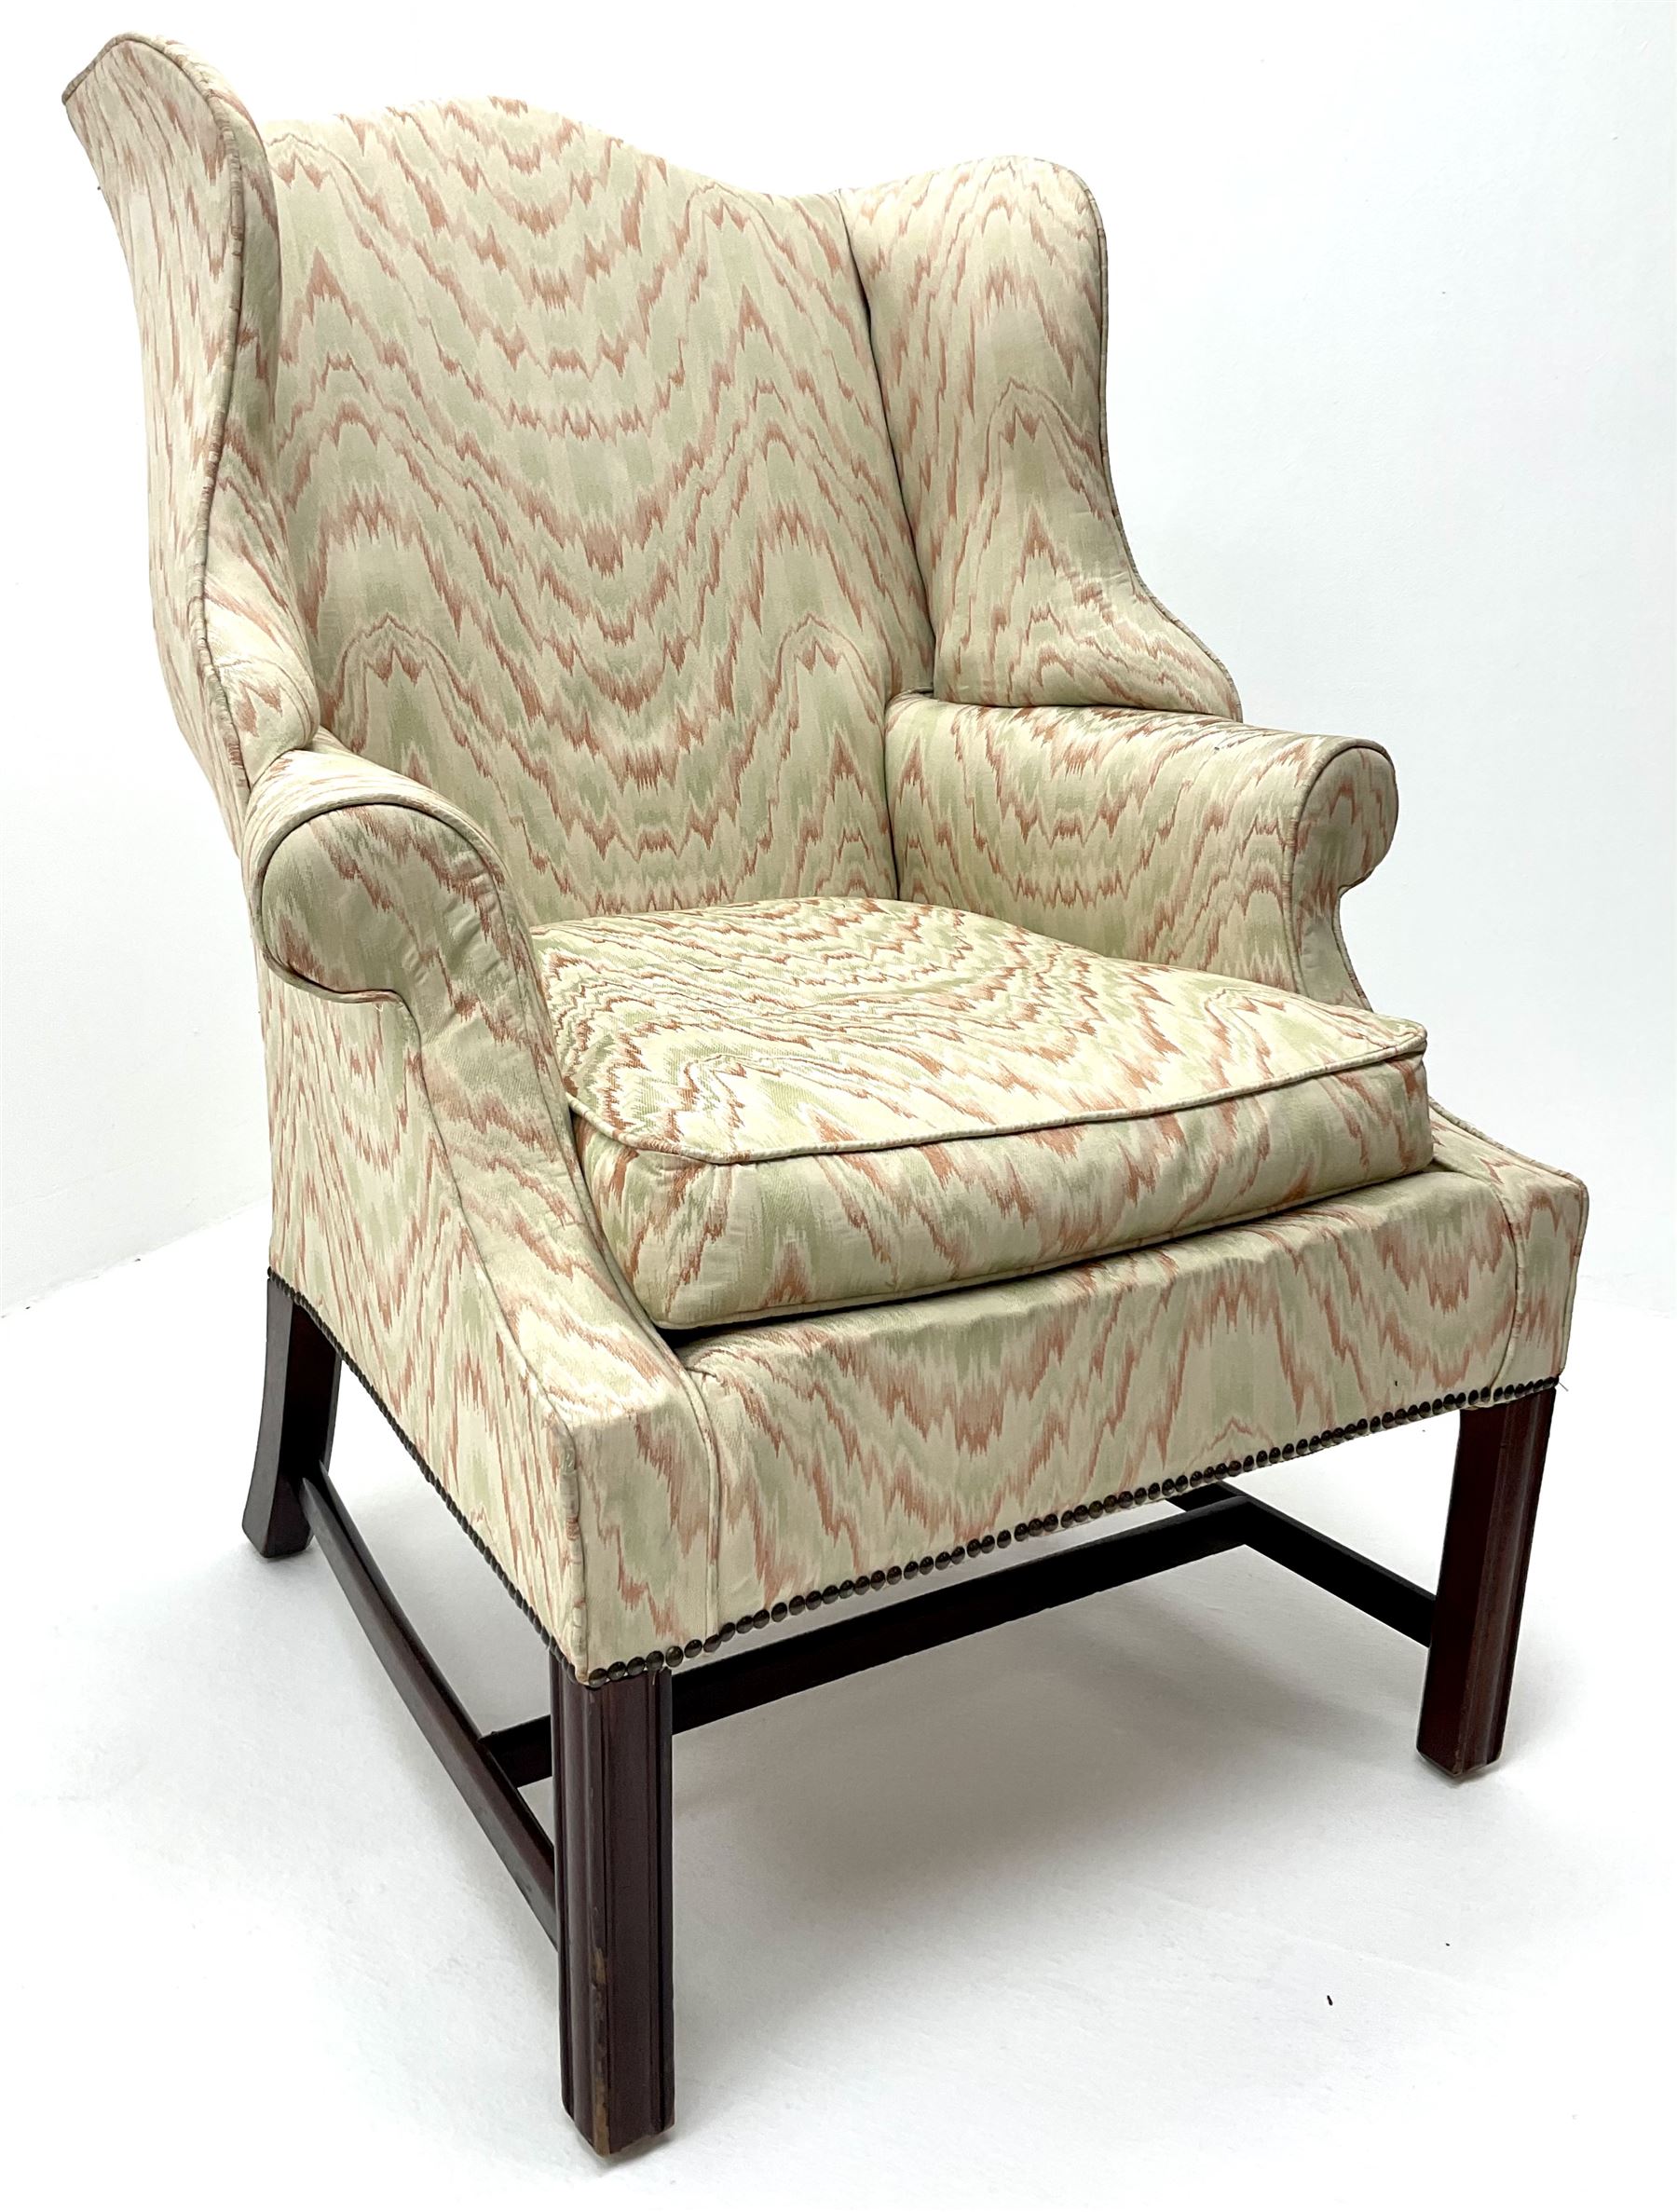 Georgian style mahogany framed wingback armchair upholstered in a beige ground fabric - Image 2 of 4